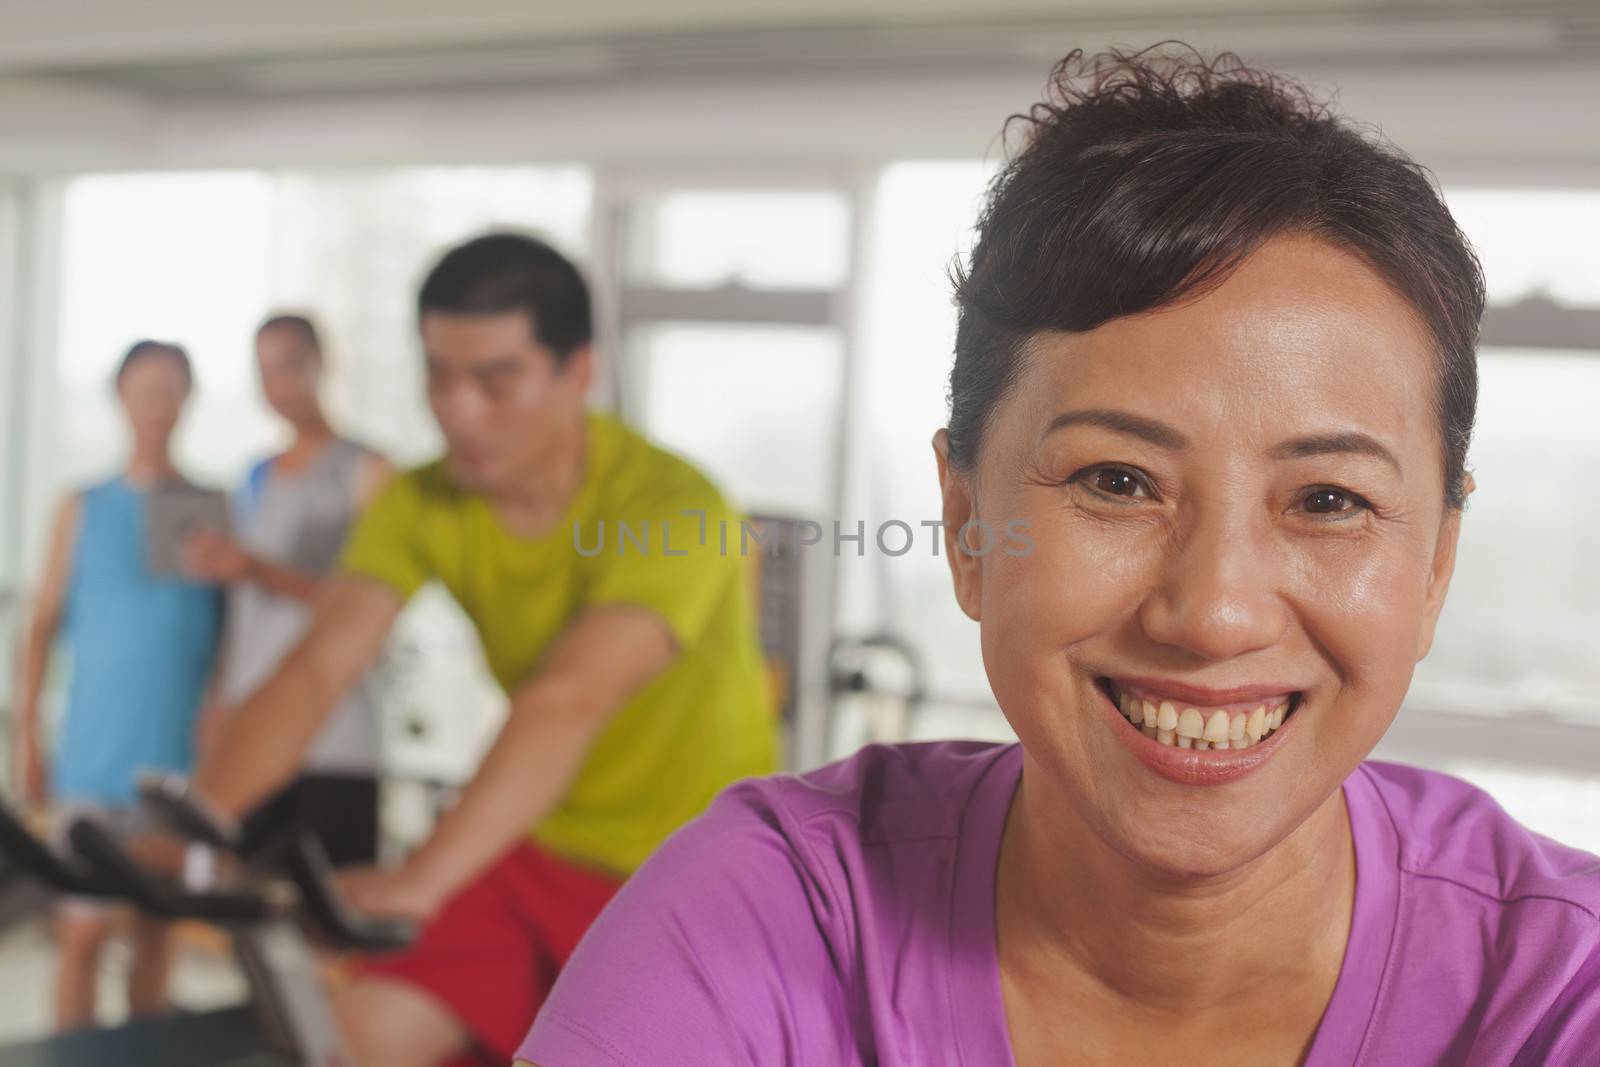 Woman smiling and exercising on the exercise bike